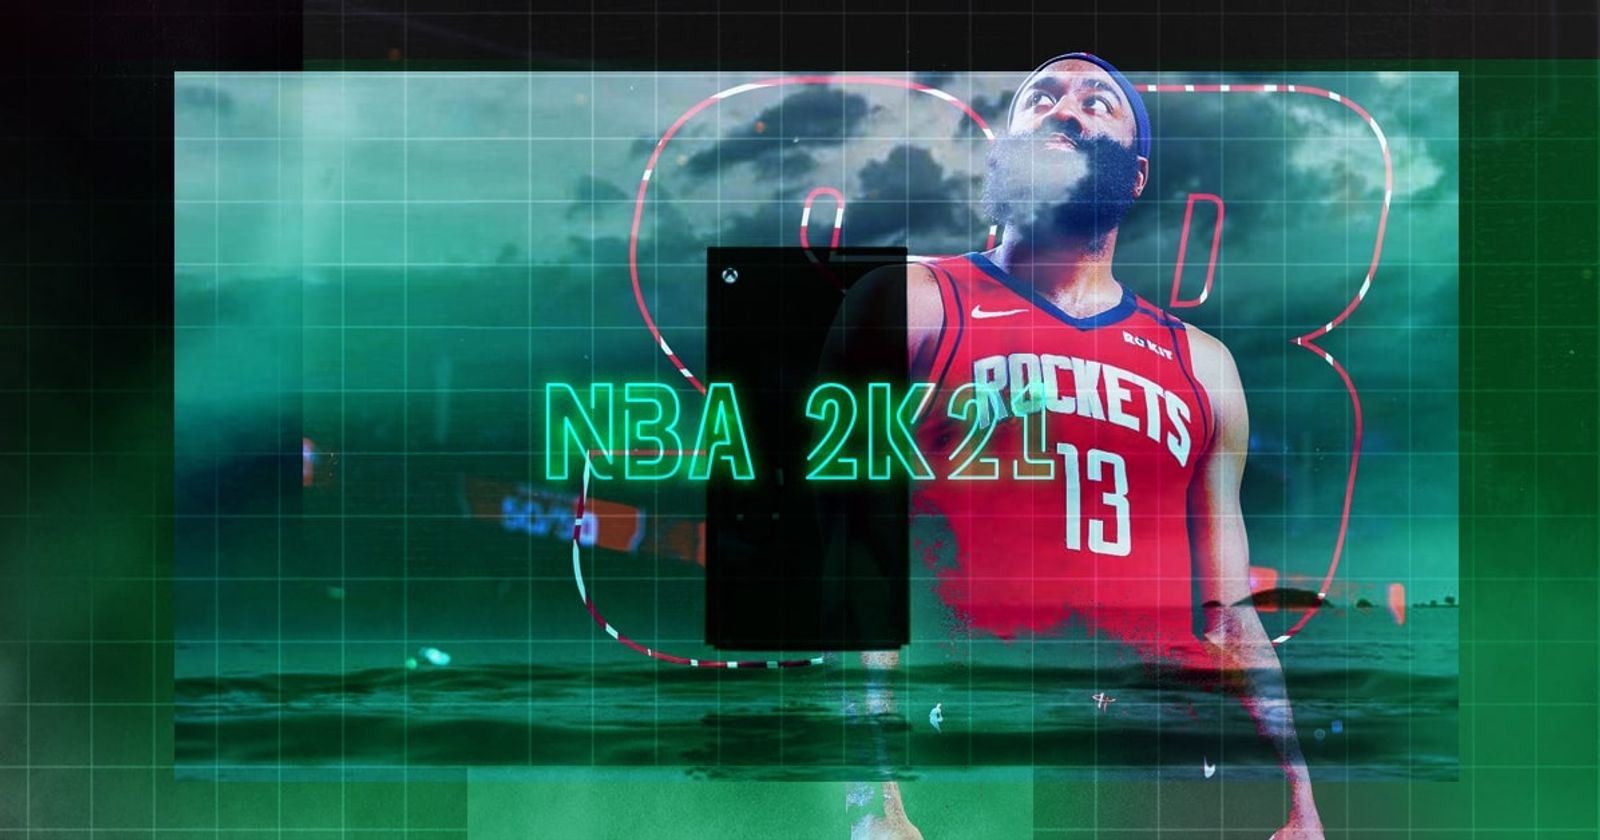 Out of Position LeBron James in NBA 2K20 MyTeam Packs